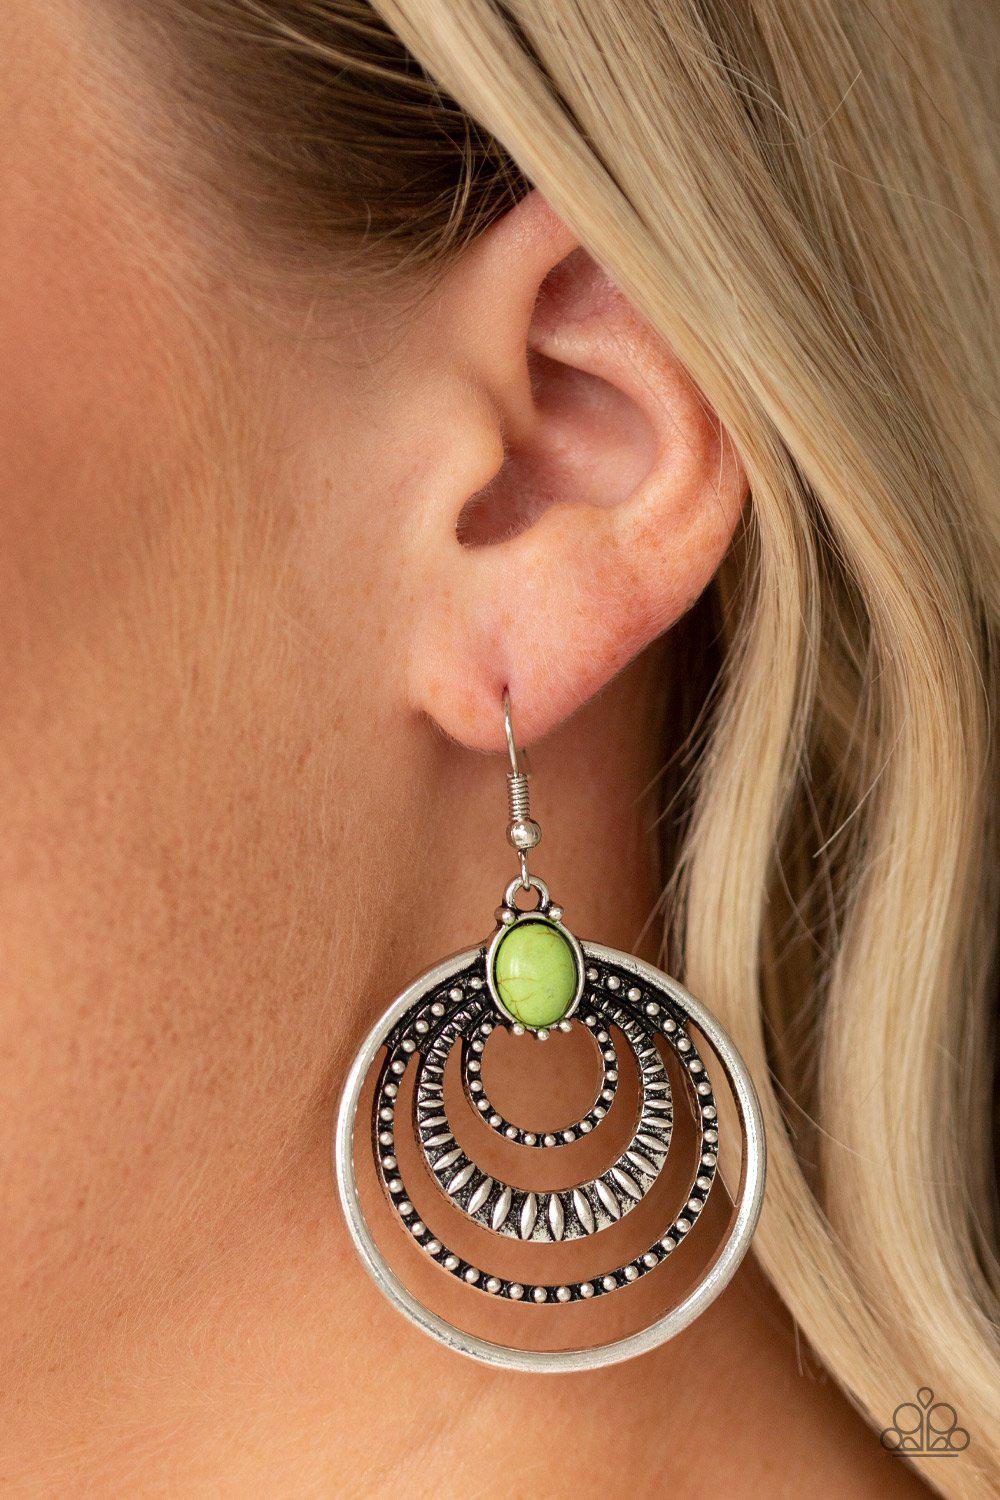 Southern Sol Green Stone Earrings - Paparazzi Accessories-CarasShop.com - $5 Jewelry by Cara Jewels